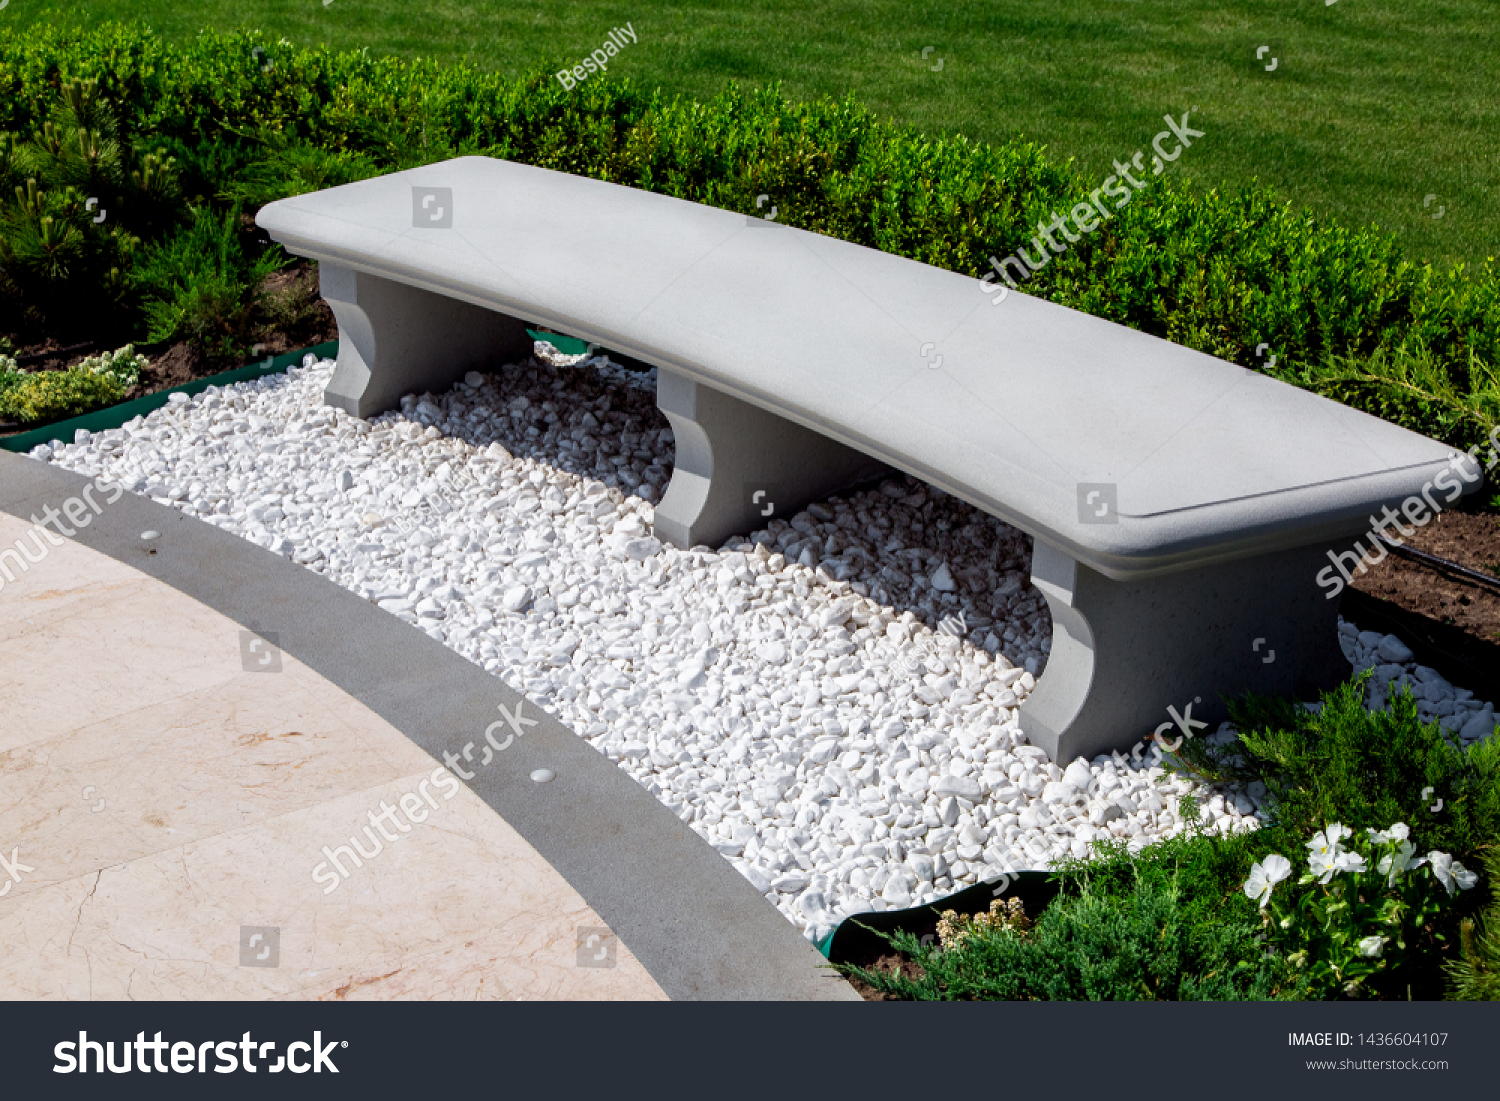 stone gray bench strewn with white stone pebbles in a garden with boxwood bushes and a green lawn with plants, close up of a place for sitting and resting near a marble tile walkway on a sunny summer. #1436604107